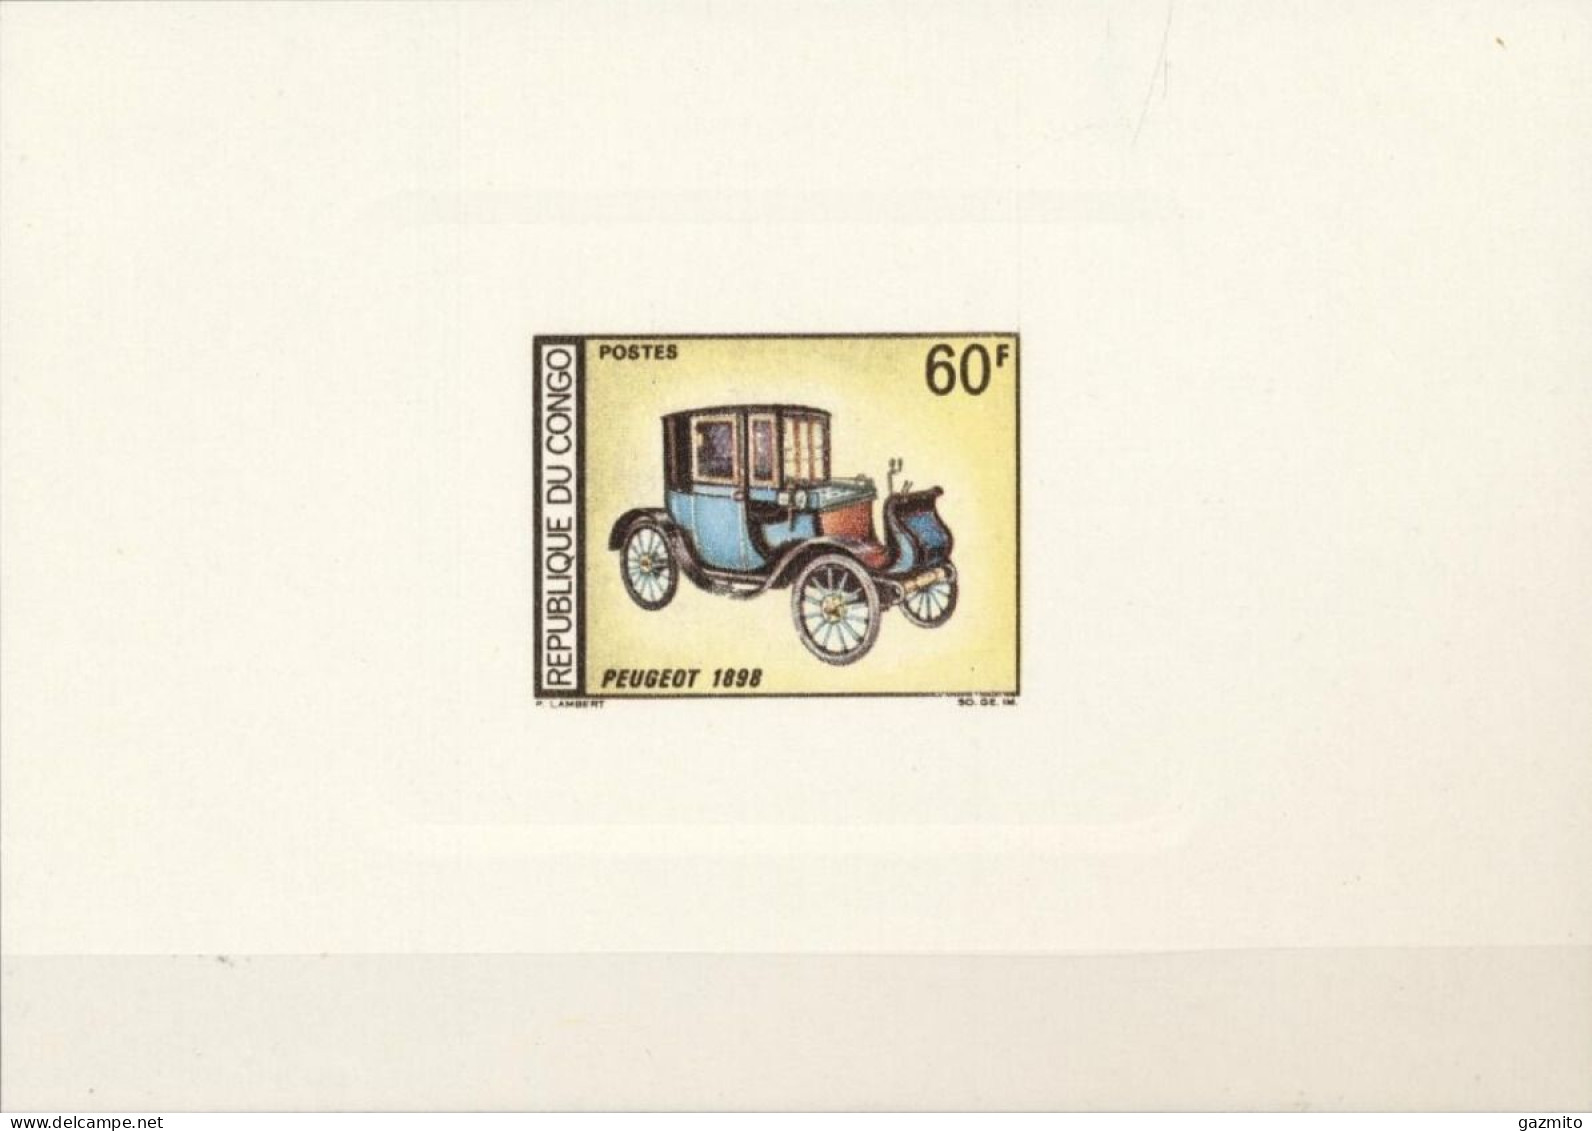 Congo Brazaville 1966, Old Car, Peugeot 1898, Block COLOUR PROOFS - Mint/hinged